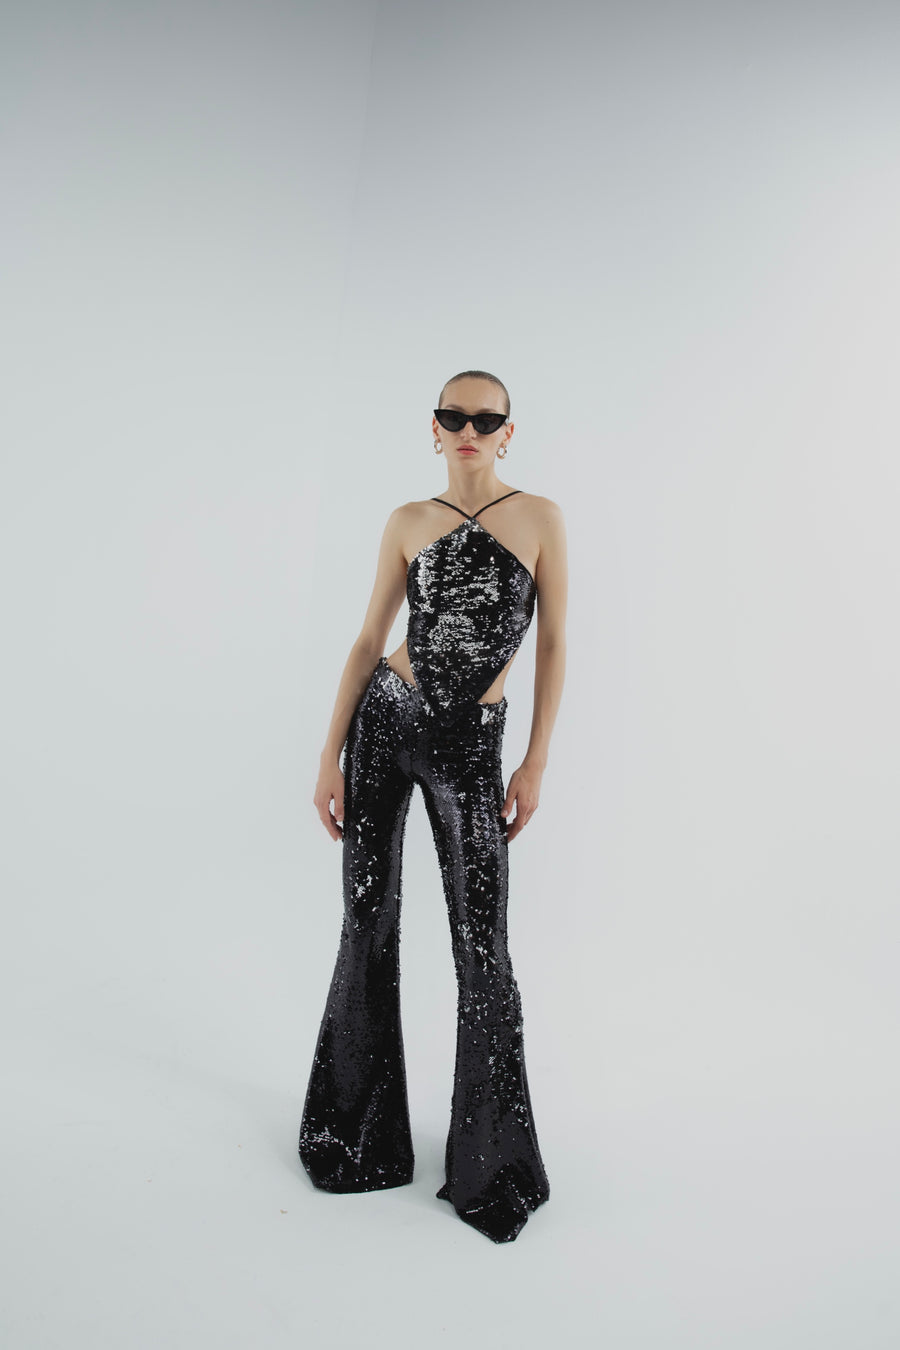 The Musgravite silver sequin suit